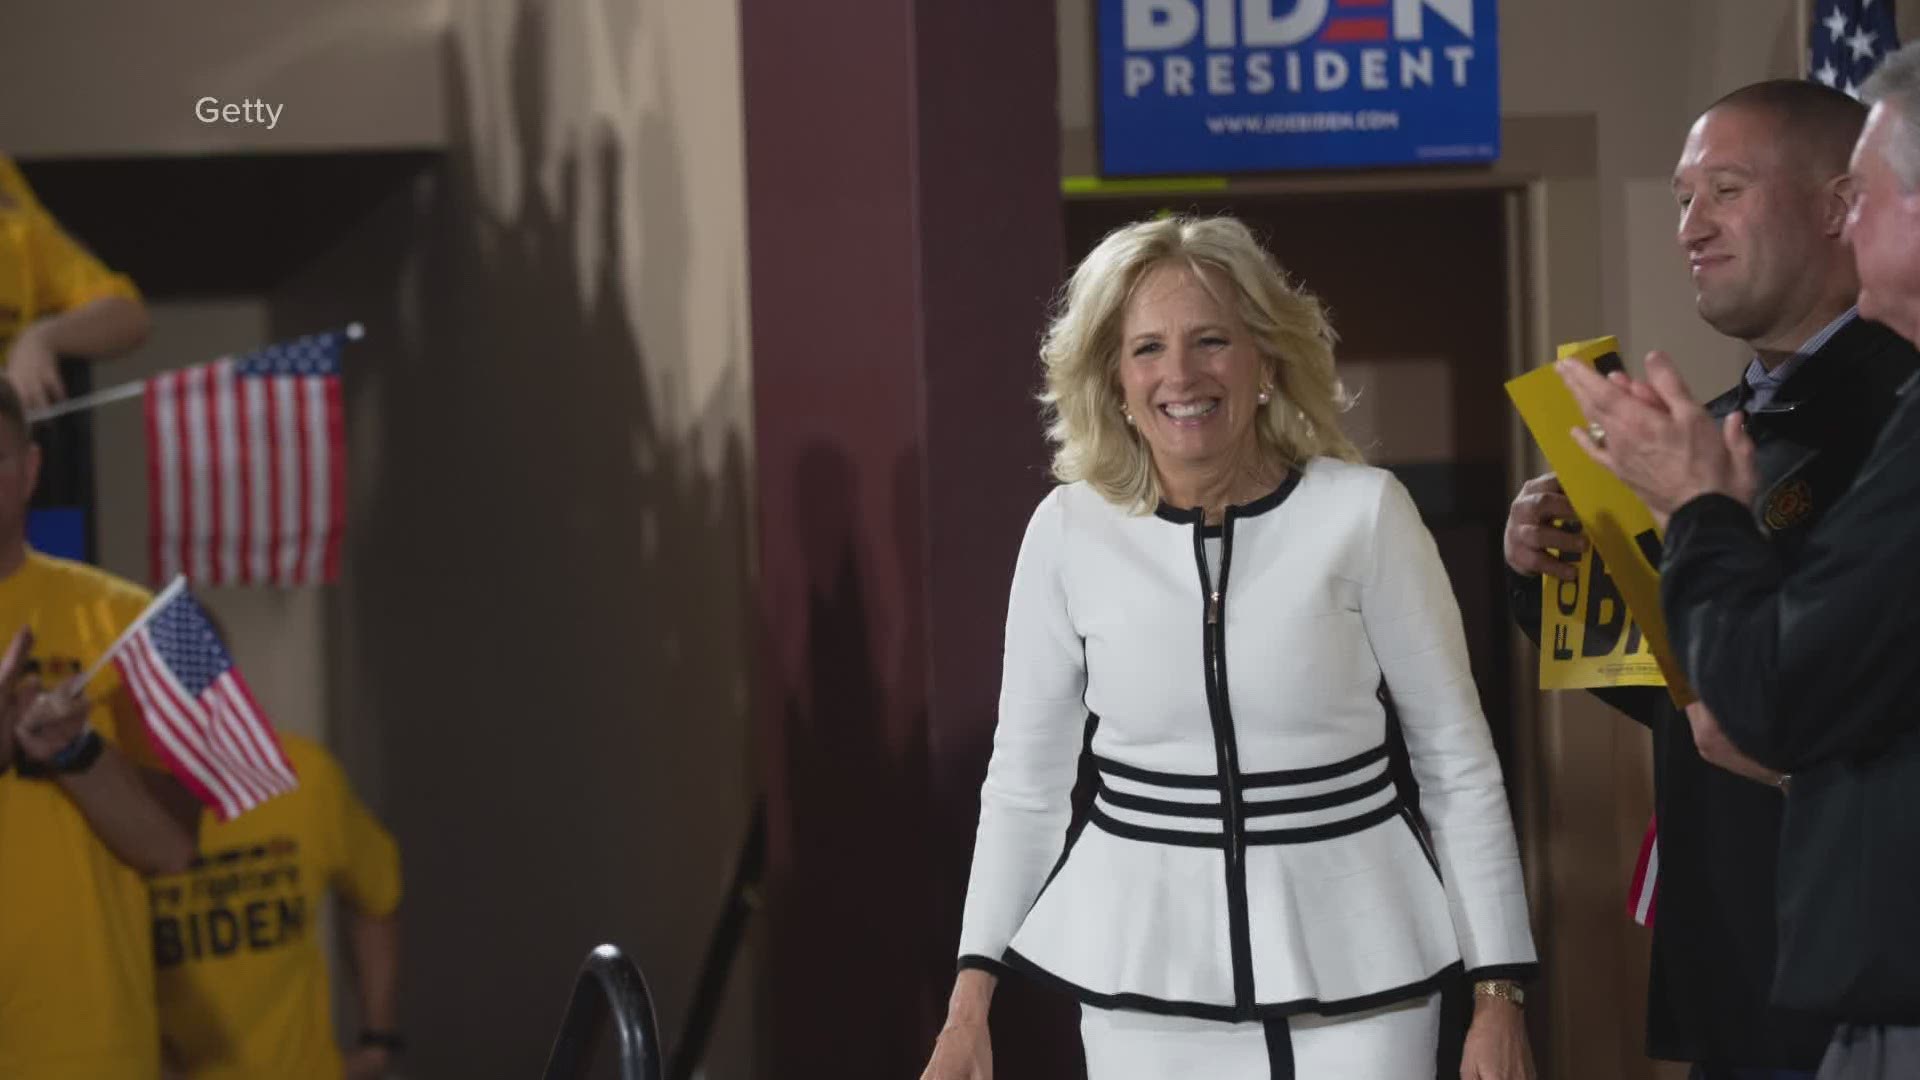 Dr. Jill Biden will visit Central Lake and Traverse City Tuesday, Sept. 29 for two campaign events.